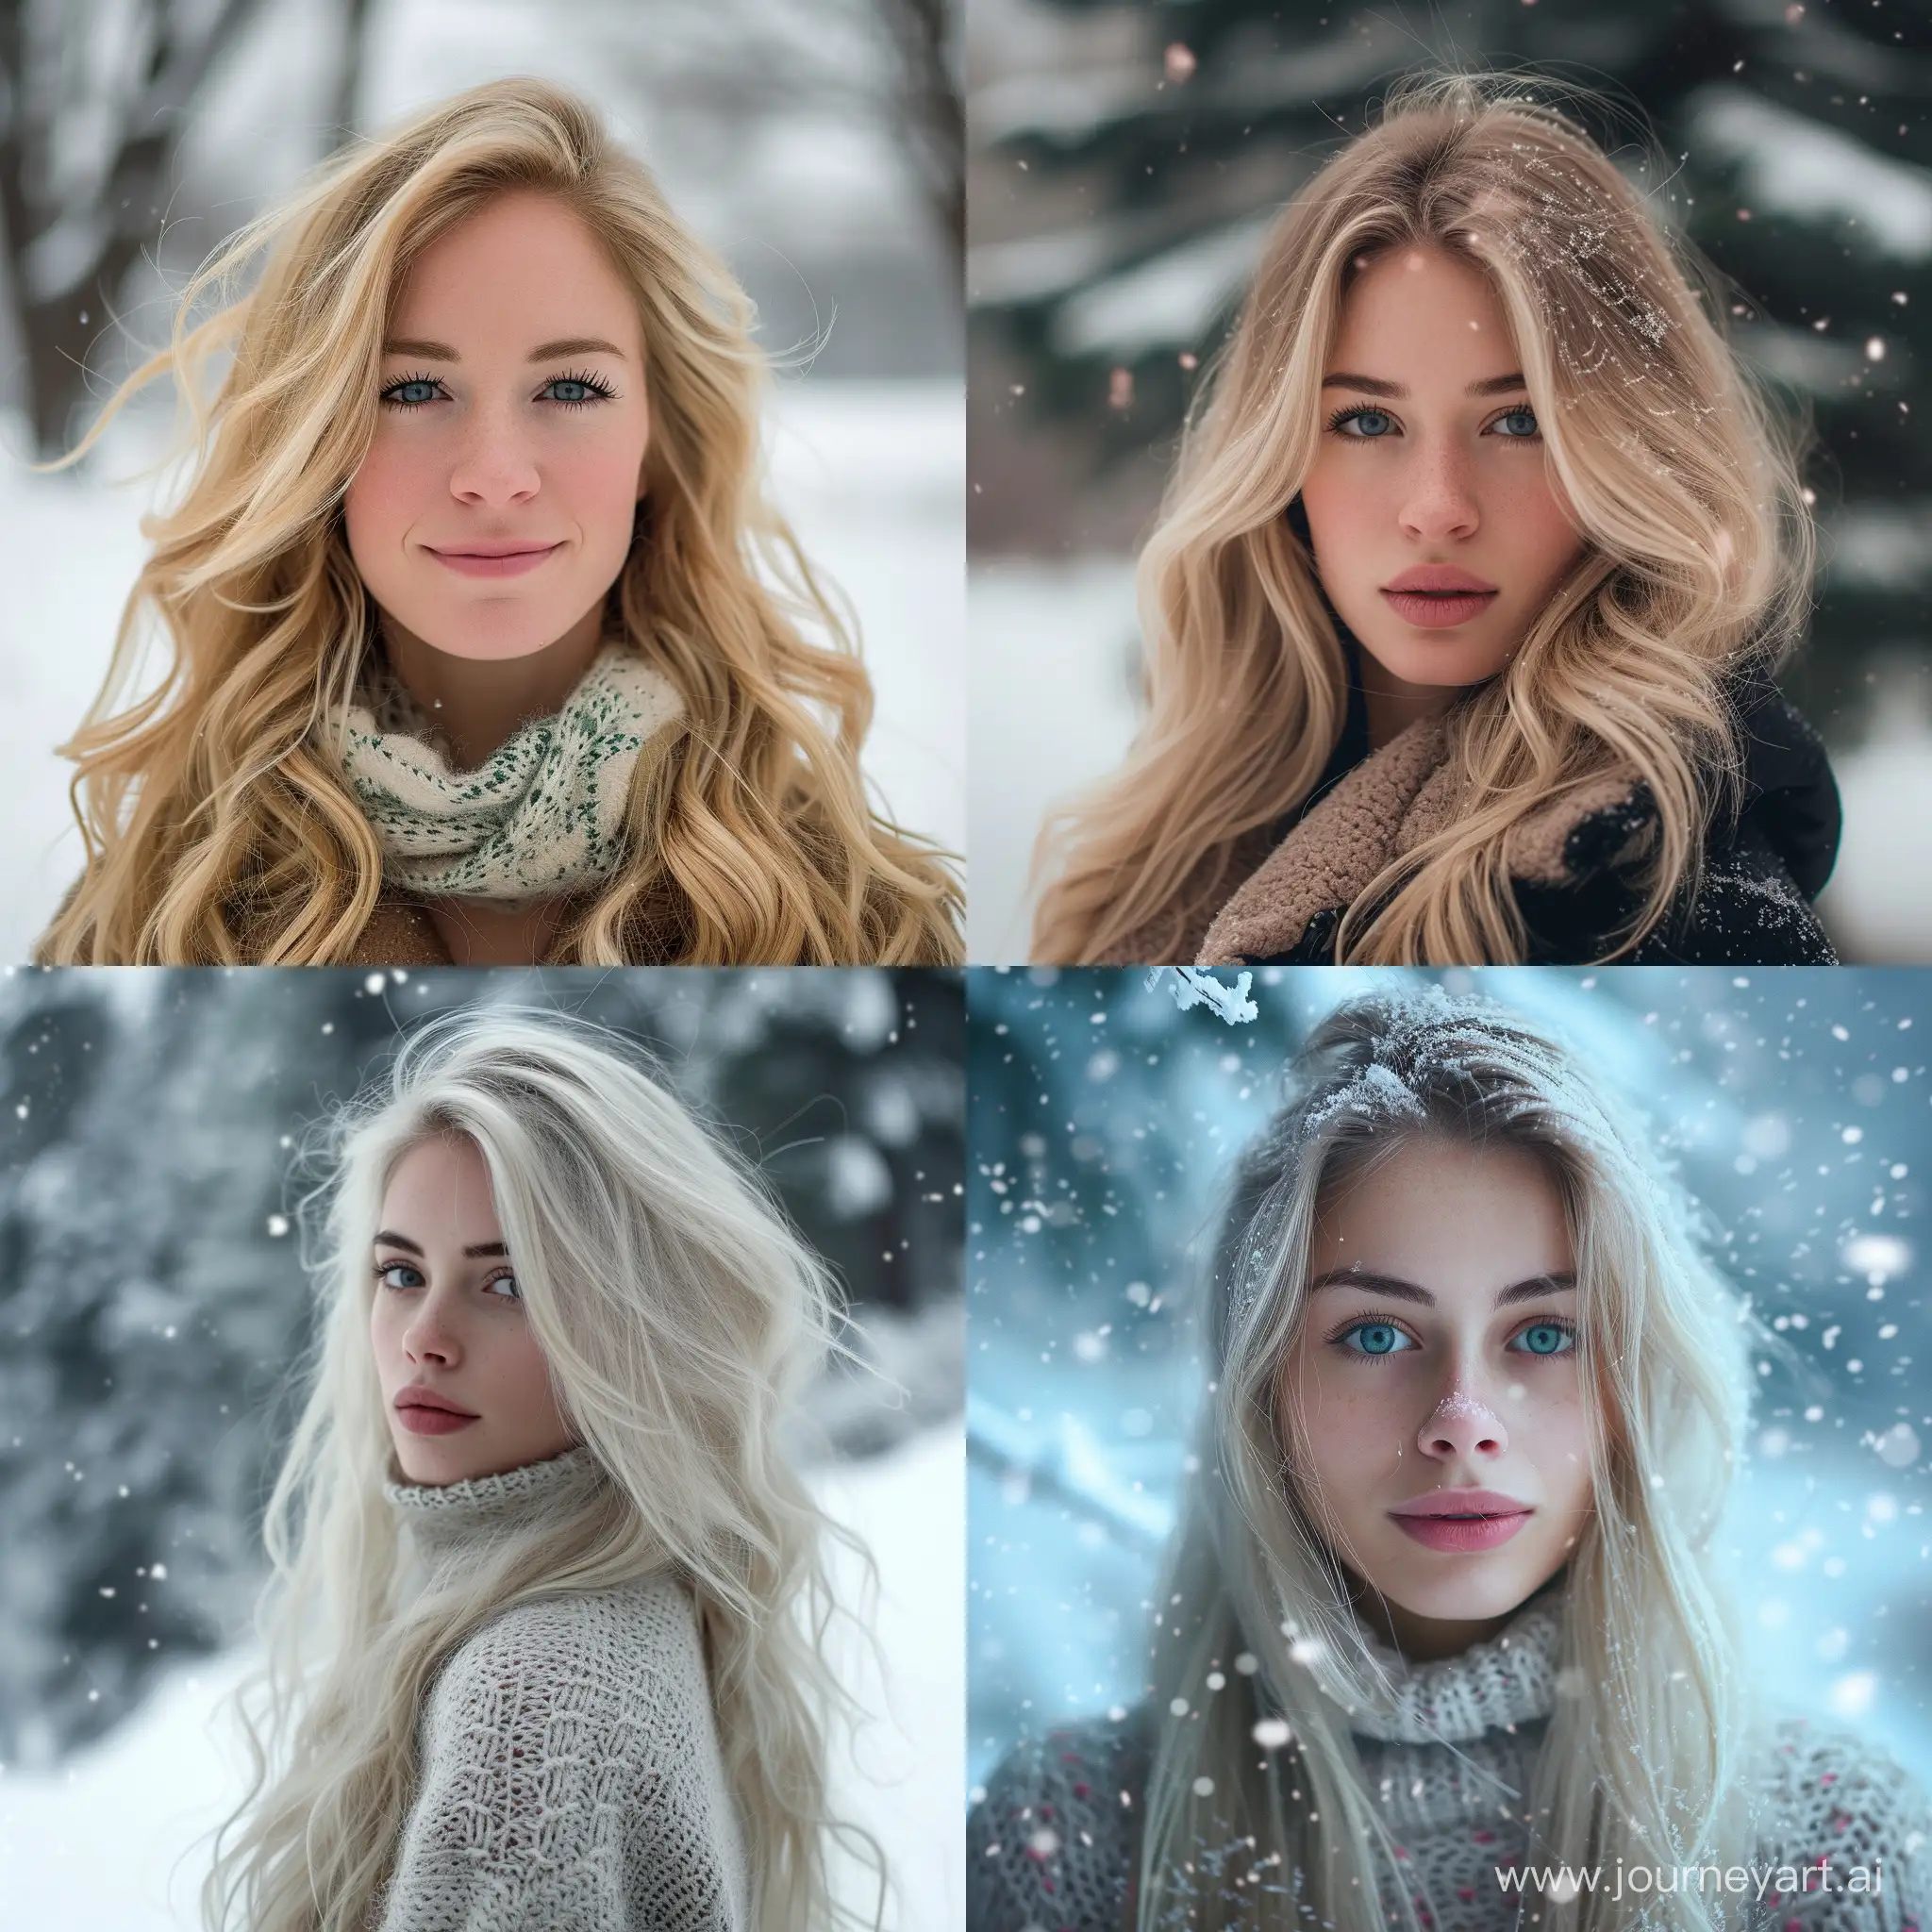 Captivating-Winter-Portrait-of-a-Blond-Woman-in-a-Snowy-Wonderland